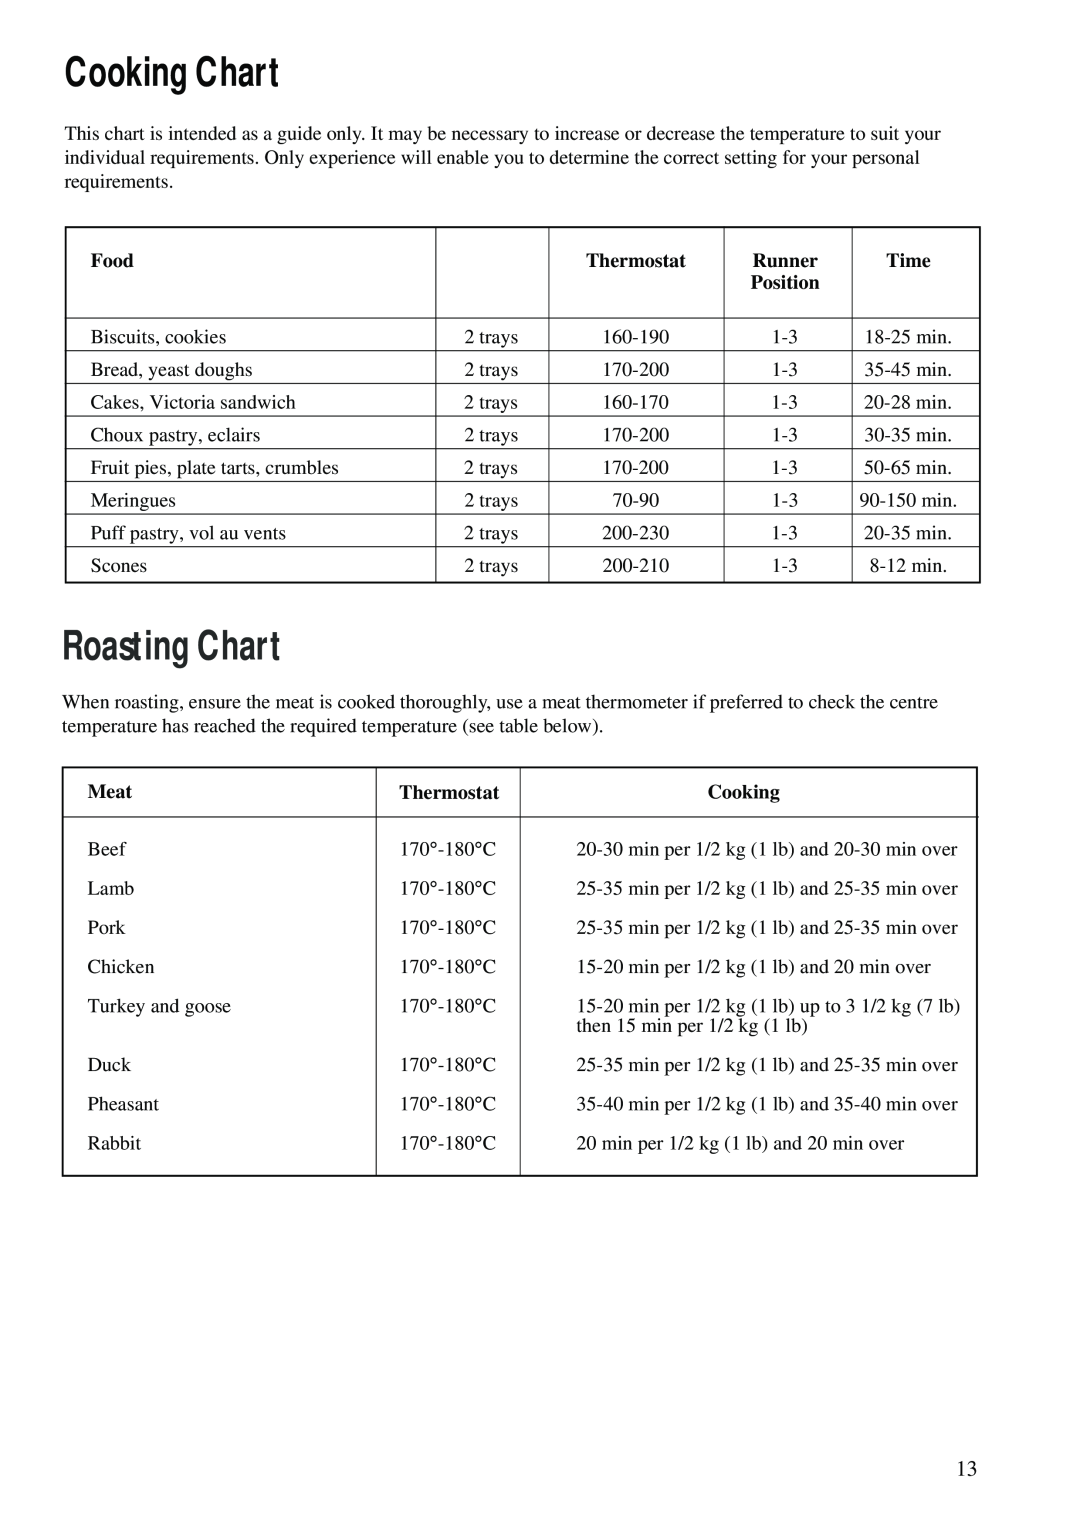 Zanussi ZCM 610 X, ZCM 600 W manual Cooking Chart, Roasting Chart, Food, Thermostat, Runner, Time, Meat 